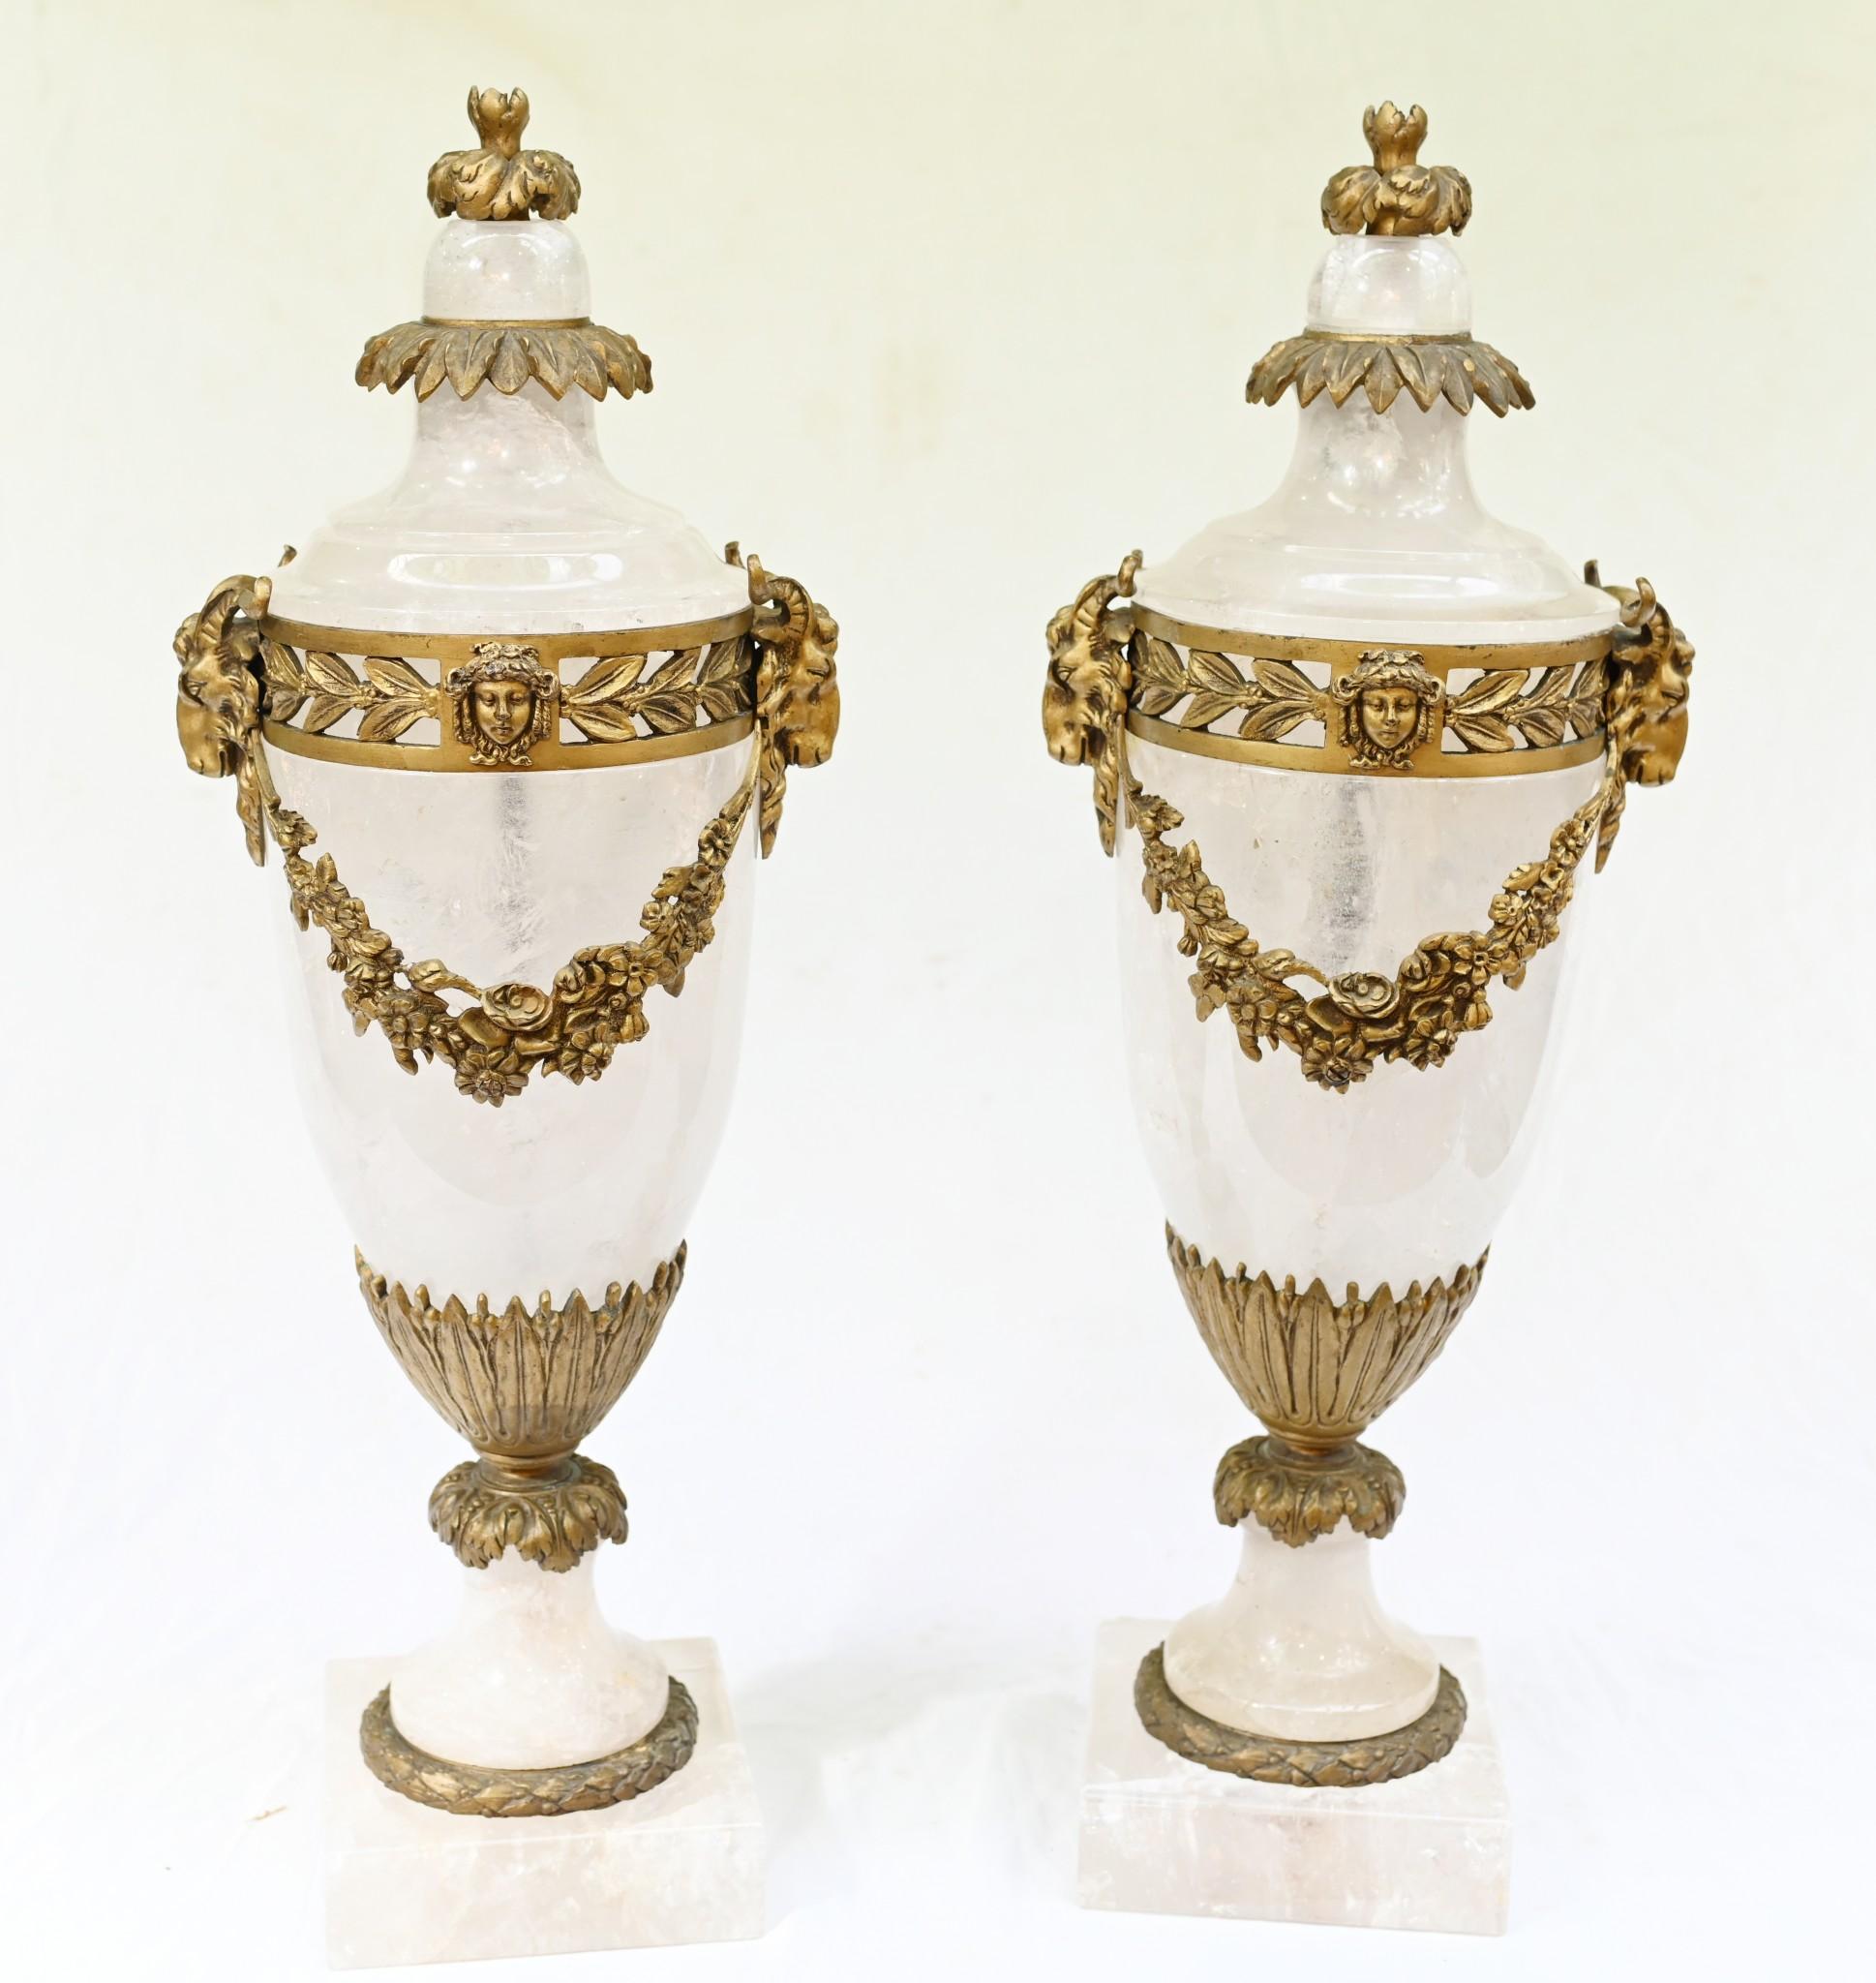 Delicate pair of antique rock crystal urns - or cassolettes
Highly decorative pair made from solid rock crystal with great opaque quality
Ormolu mounts include a fruit encrusted sash and rams head
Circva 1860 on this collectable pair
We purchased